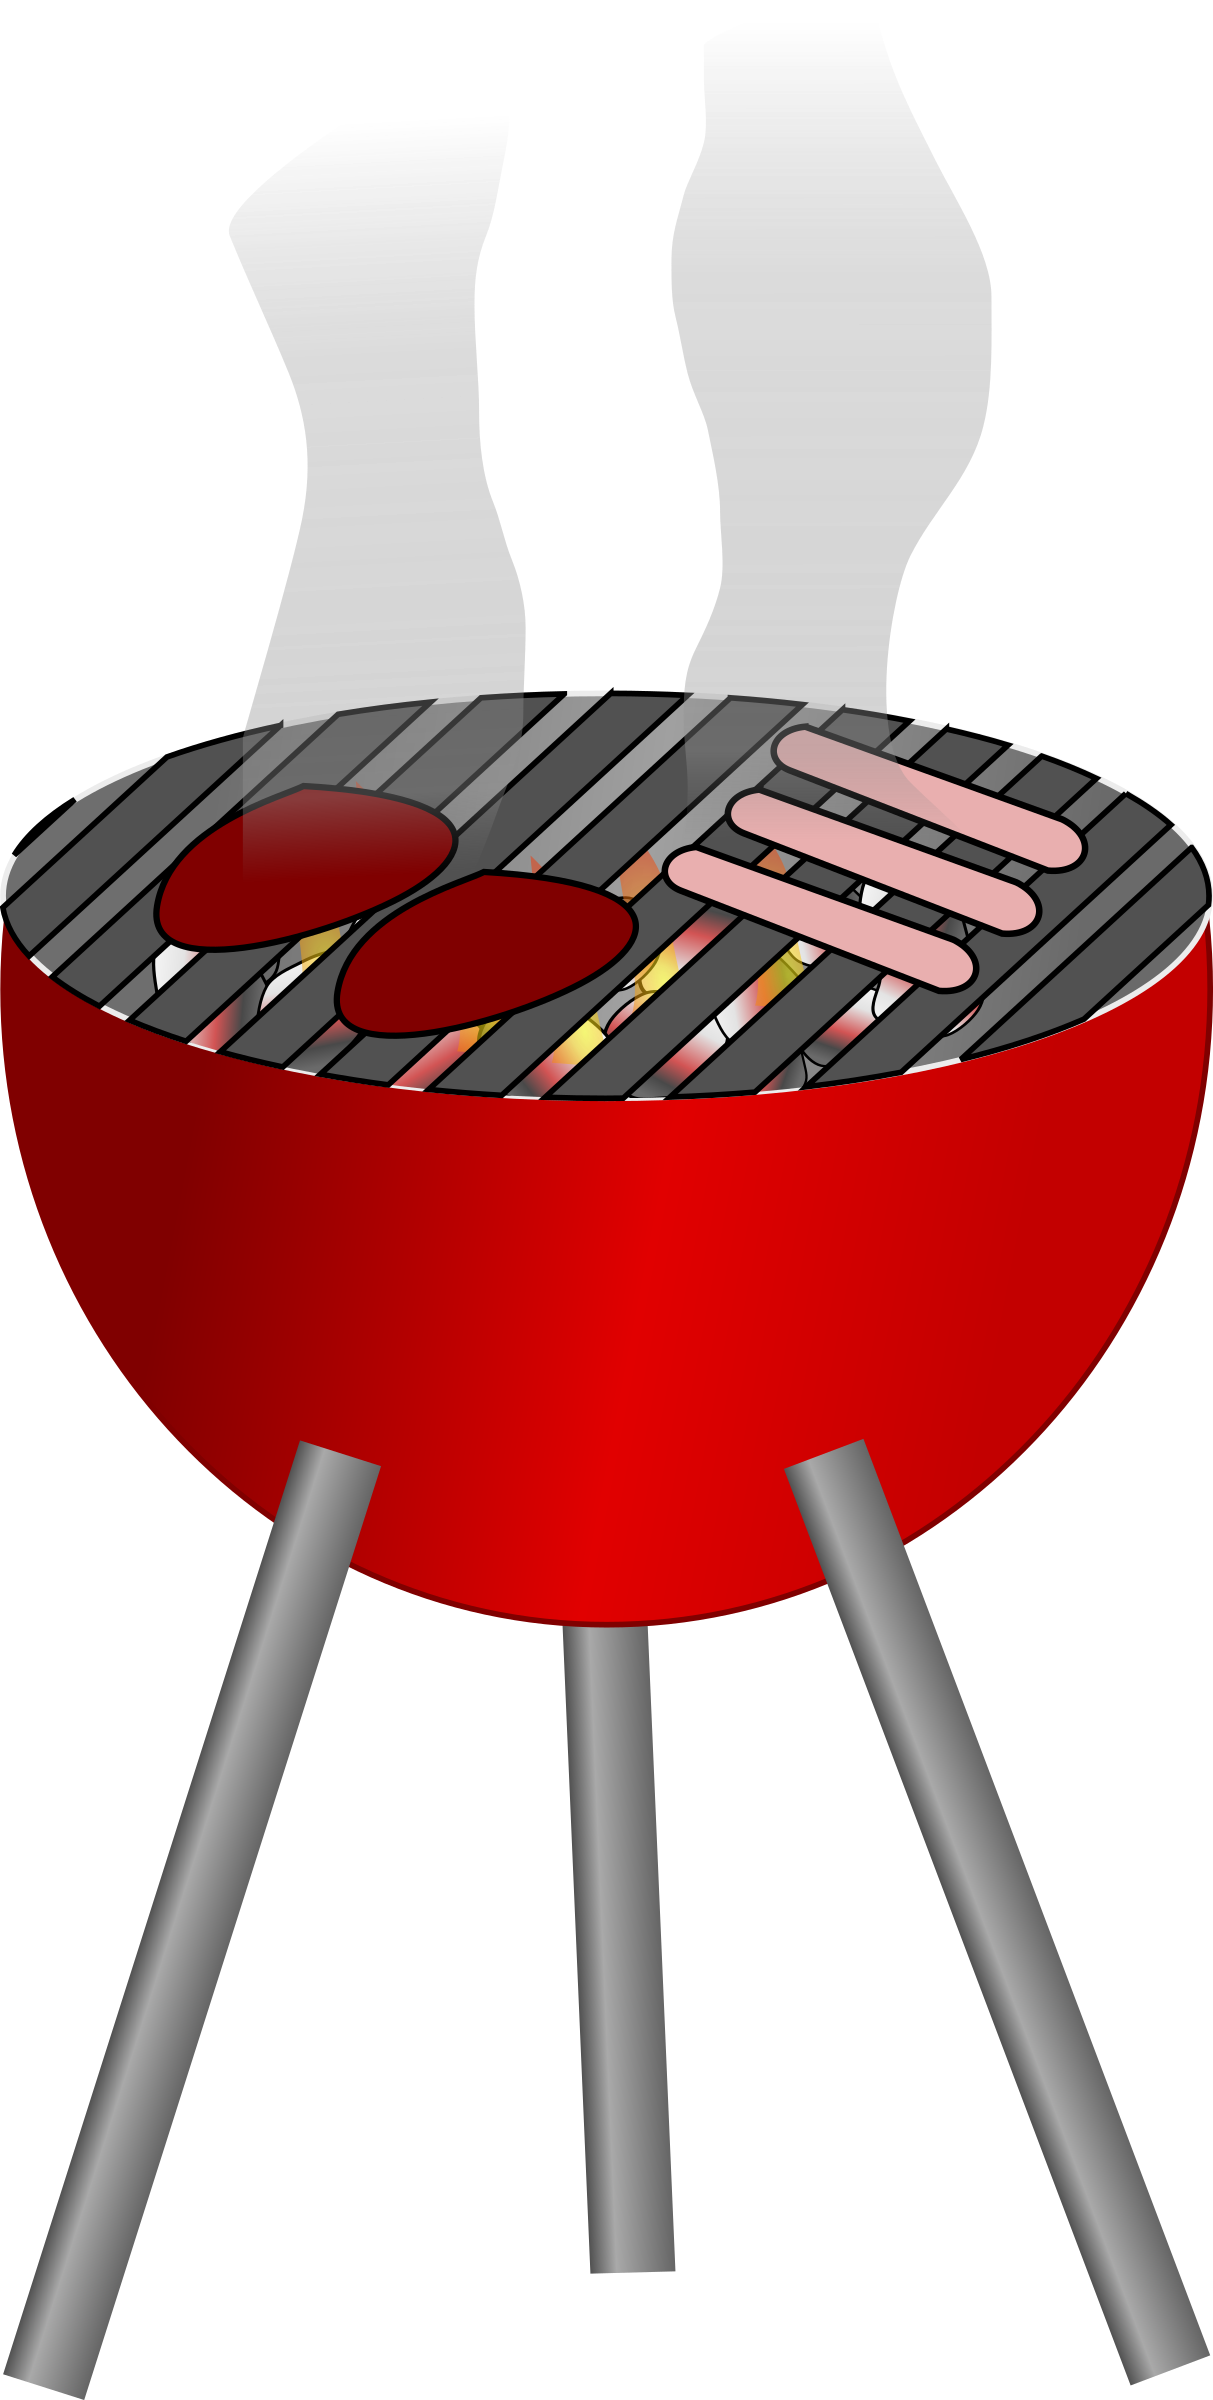 Barbecue clipart animated, Barbecue animated Transparent